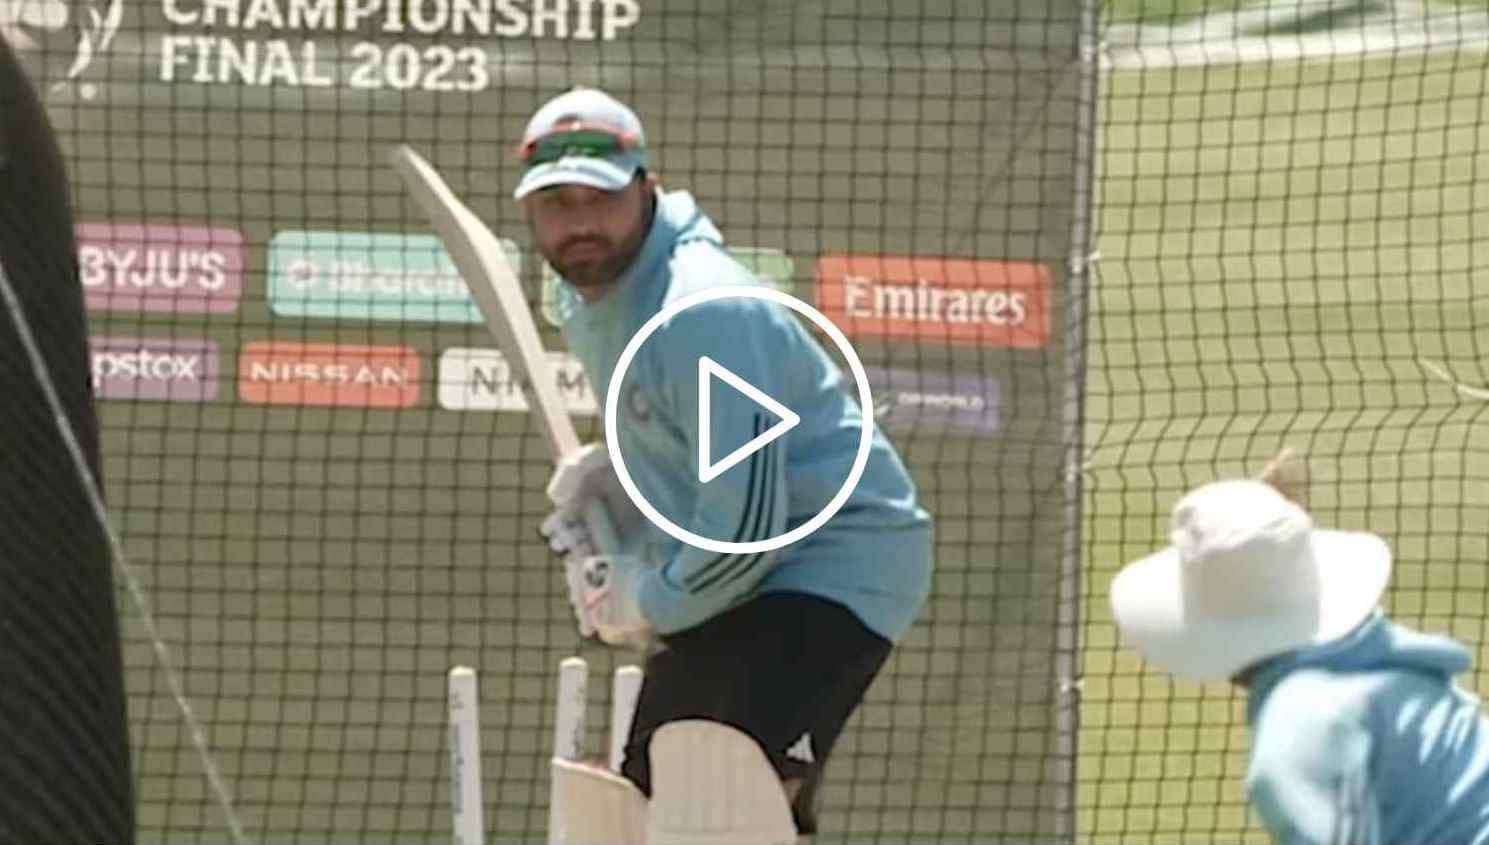 [WATCH]: The Hit-Man Failing To Hit Hard, Rohit Sharma Practices Ahead of WTC Final 2023